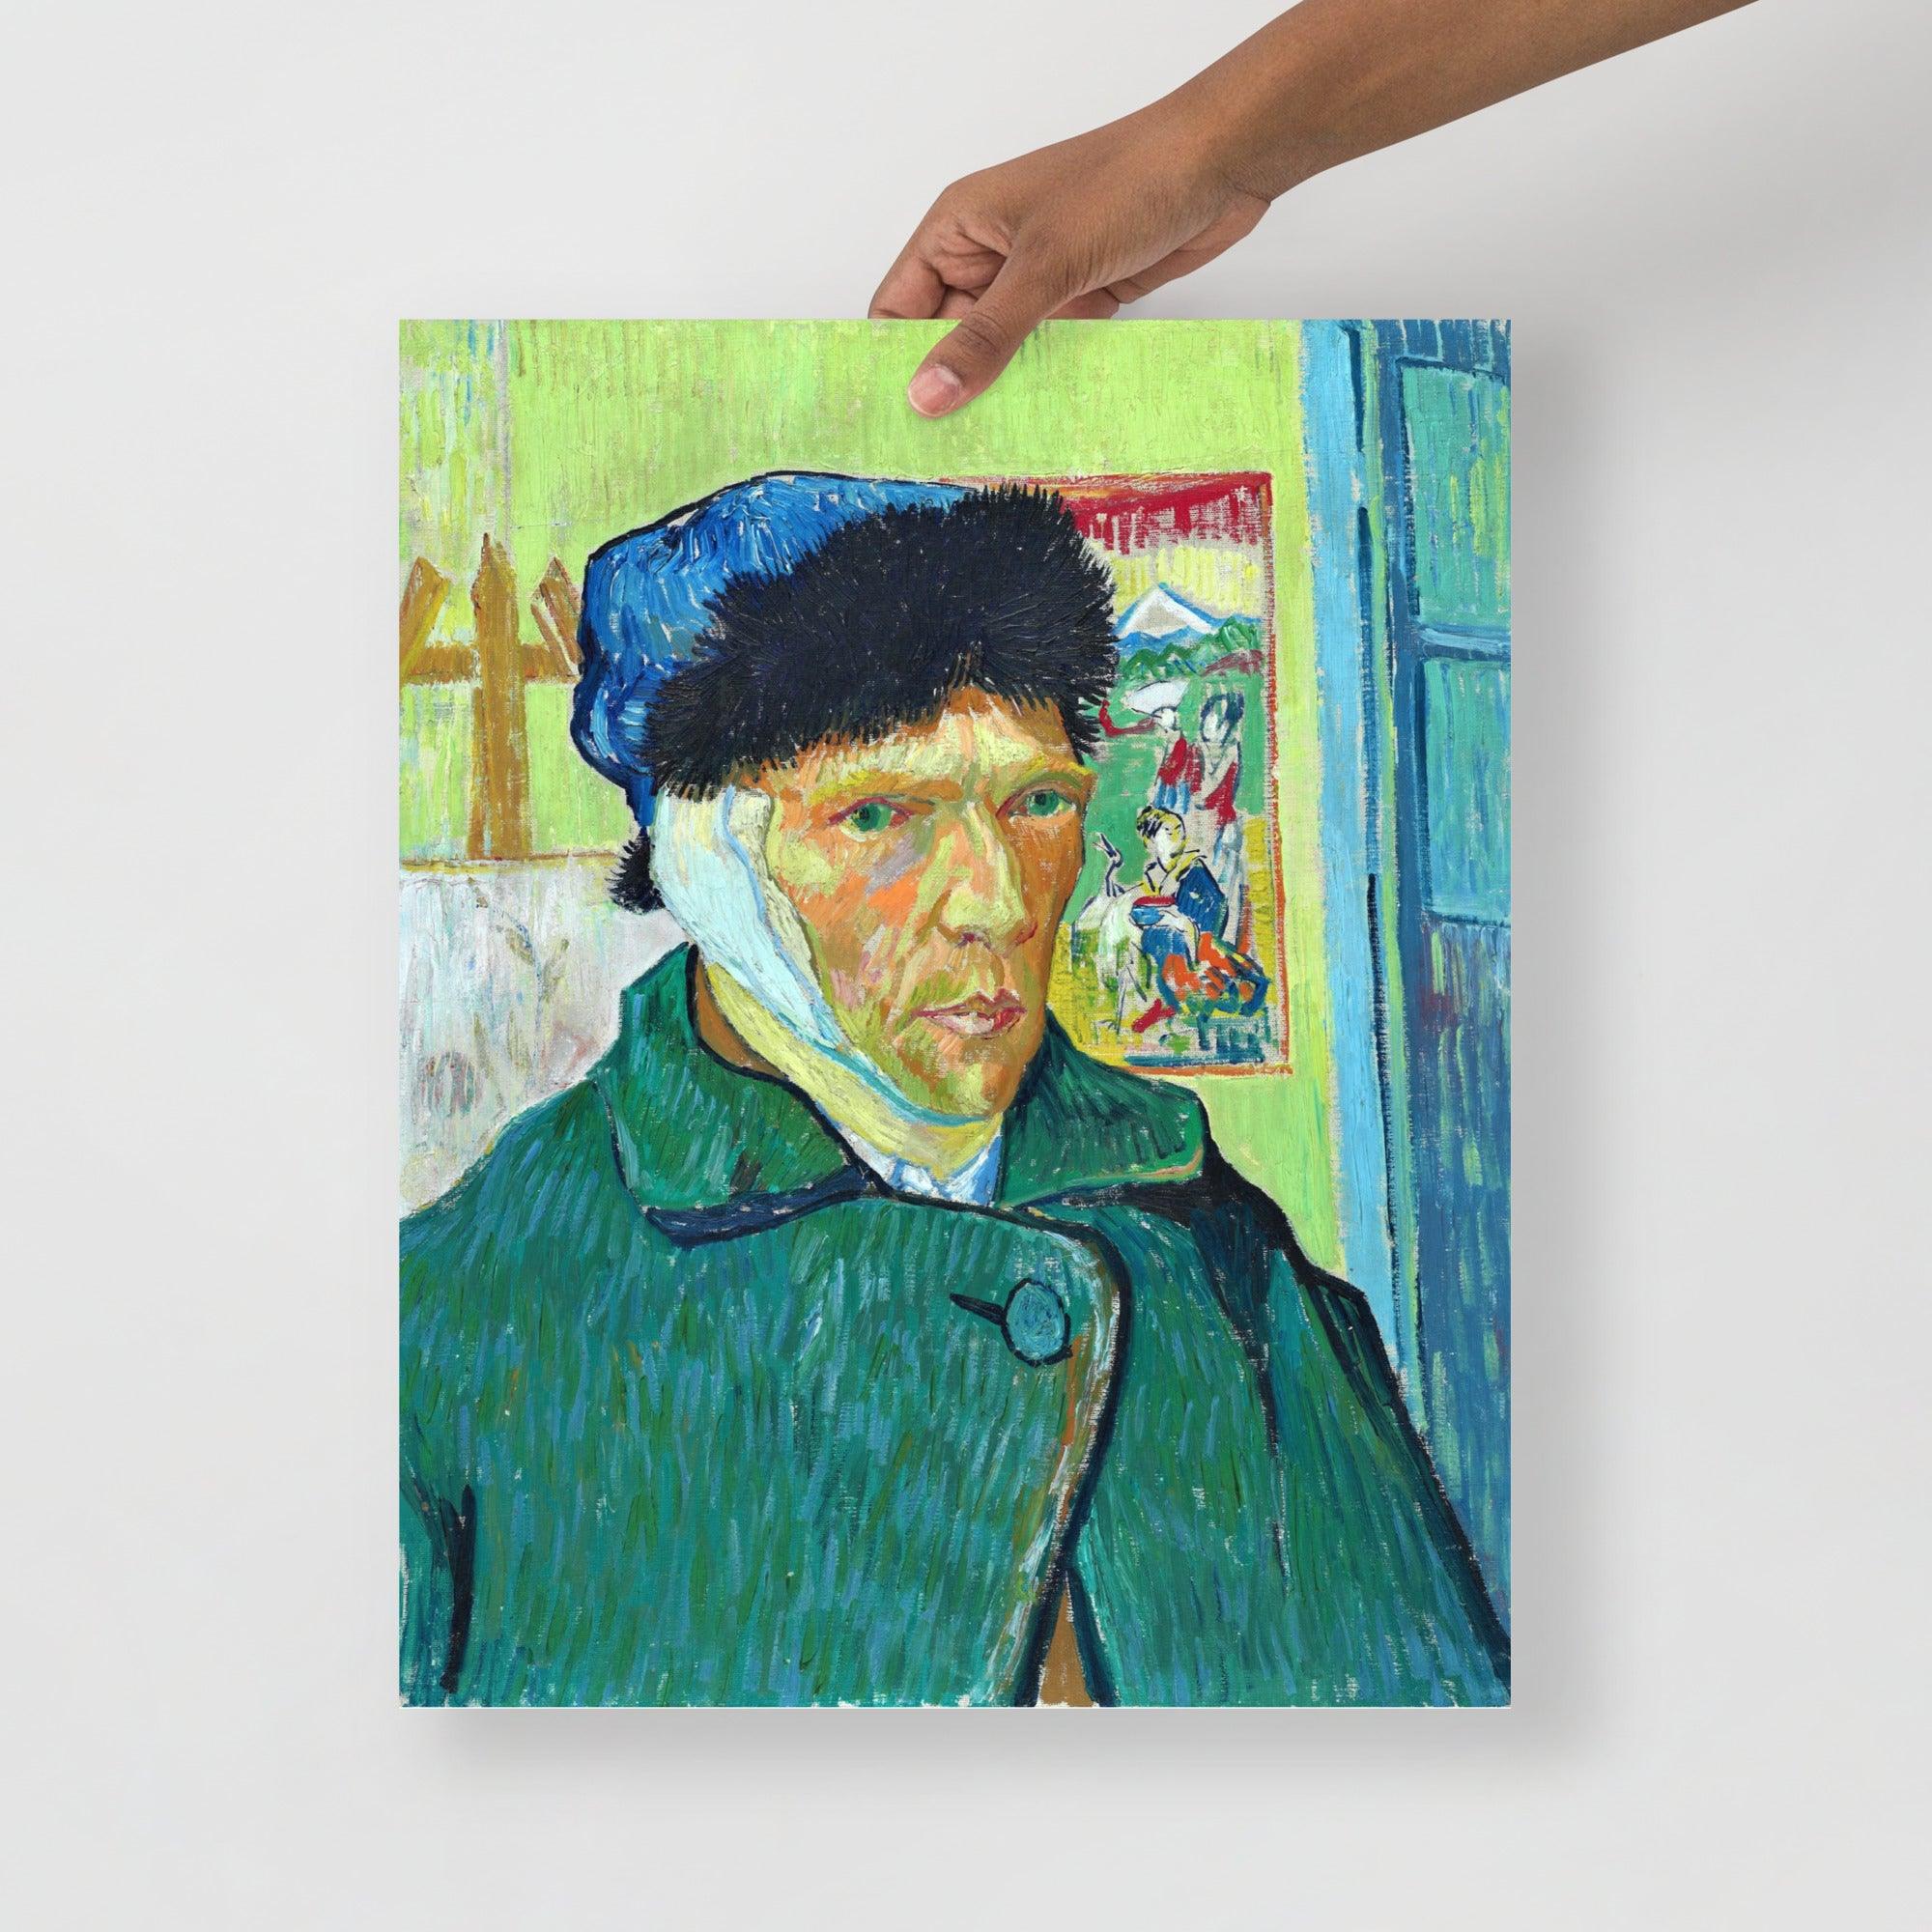 A Self Portrait With Bandaged Ear by Vincent Van Gogh poster on a plain backdrop in size 16x20”.